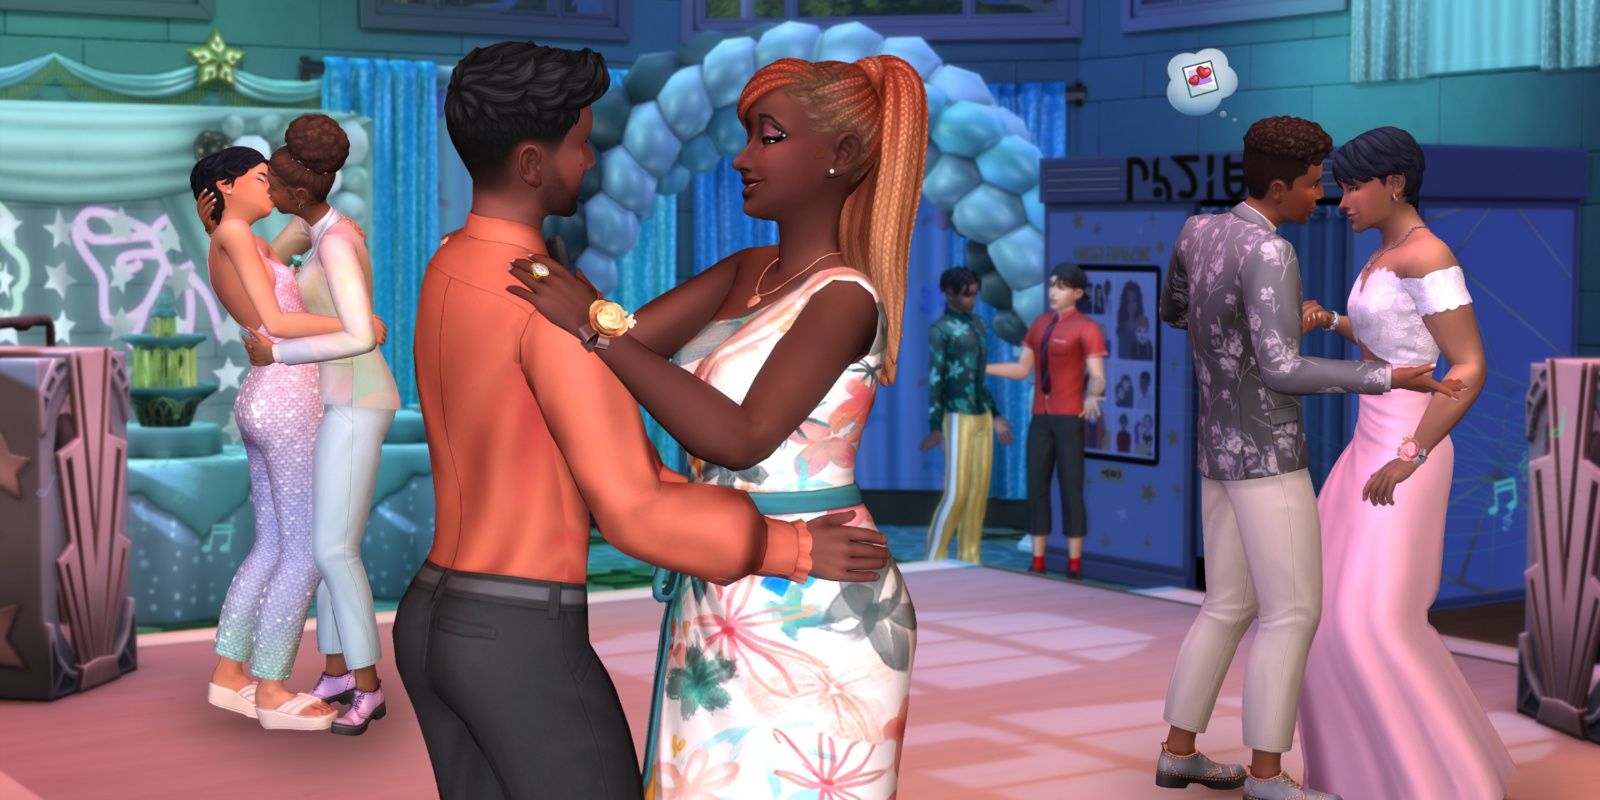 Sims attend the Prom in the High School Years expansion of Sims 4